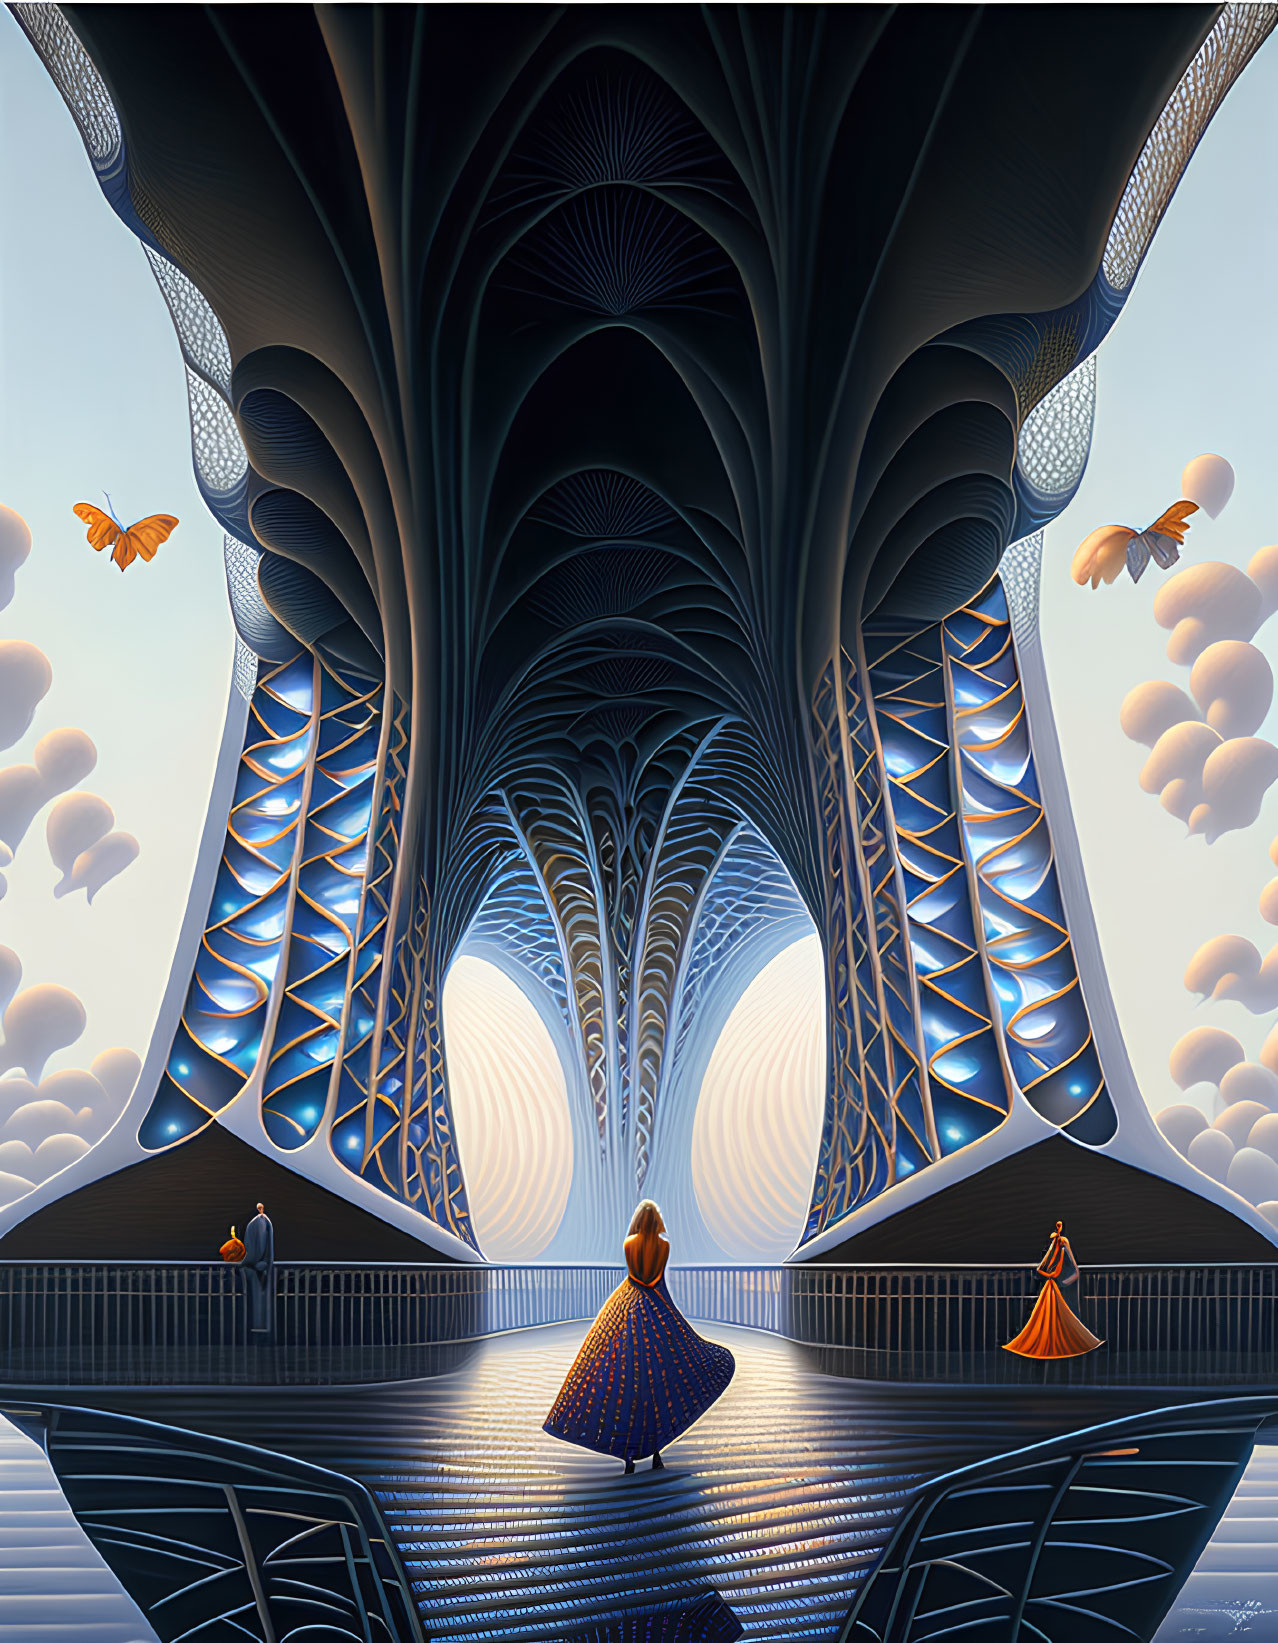 Futuristic illustration of person, figures, and golden birds in grand symmetrical architecture